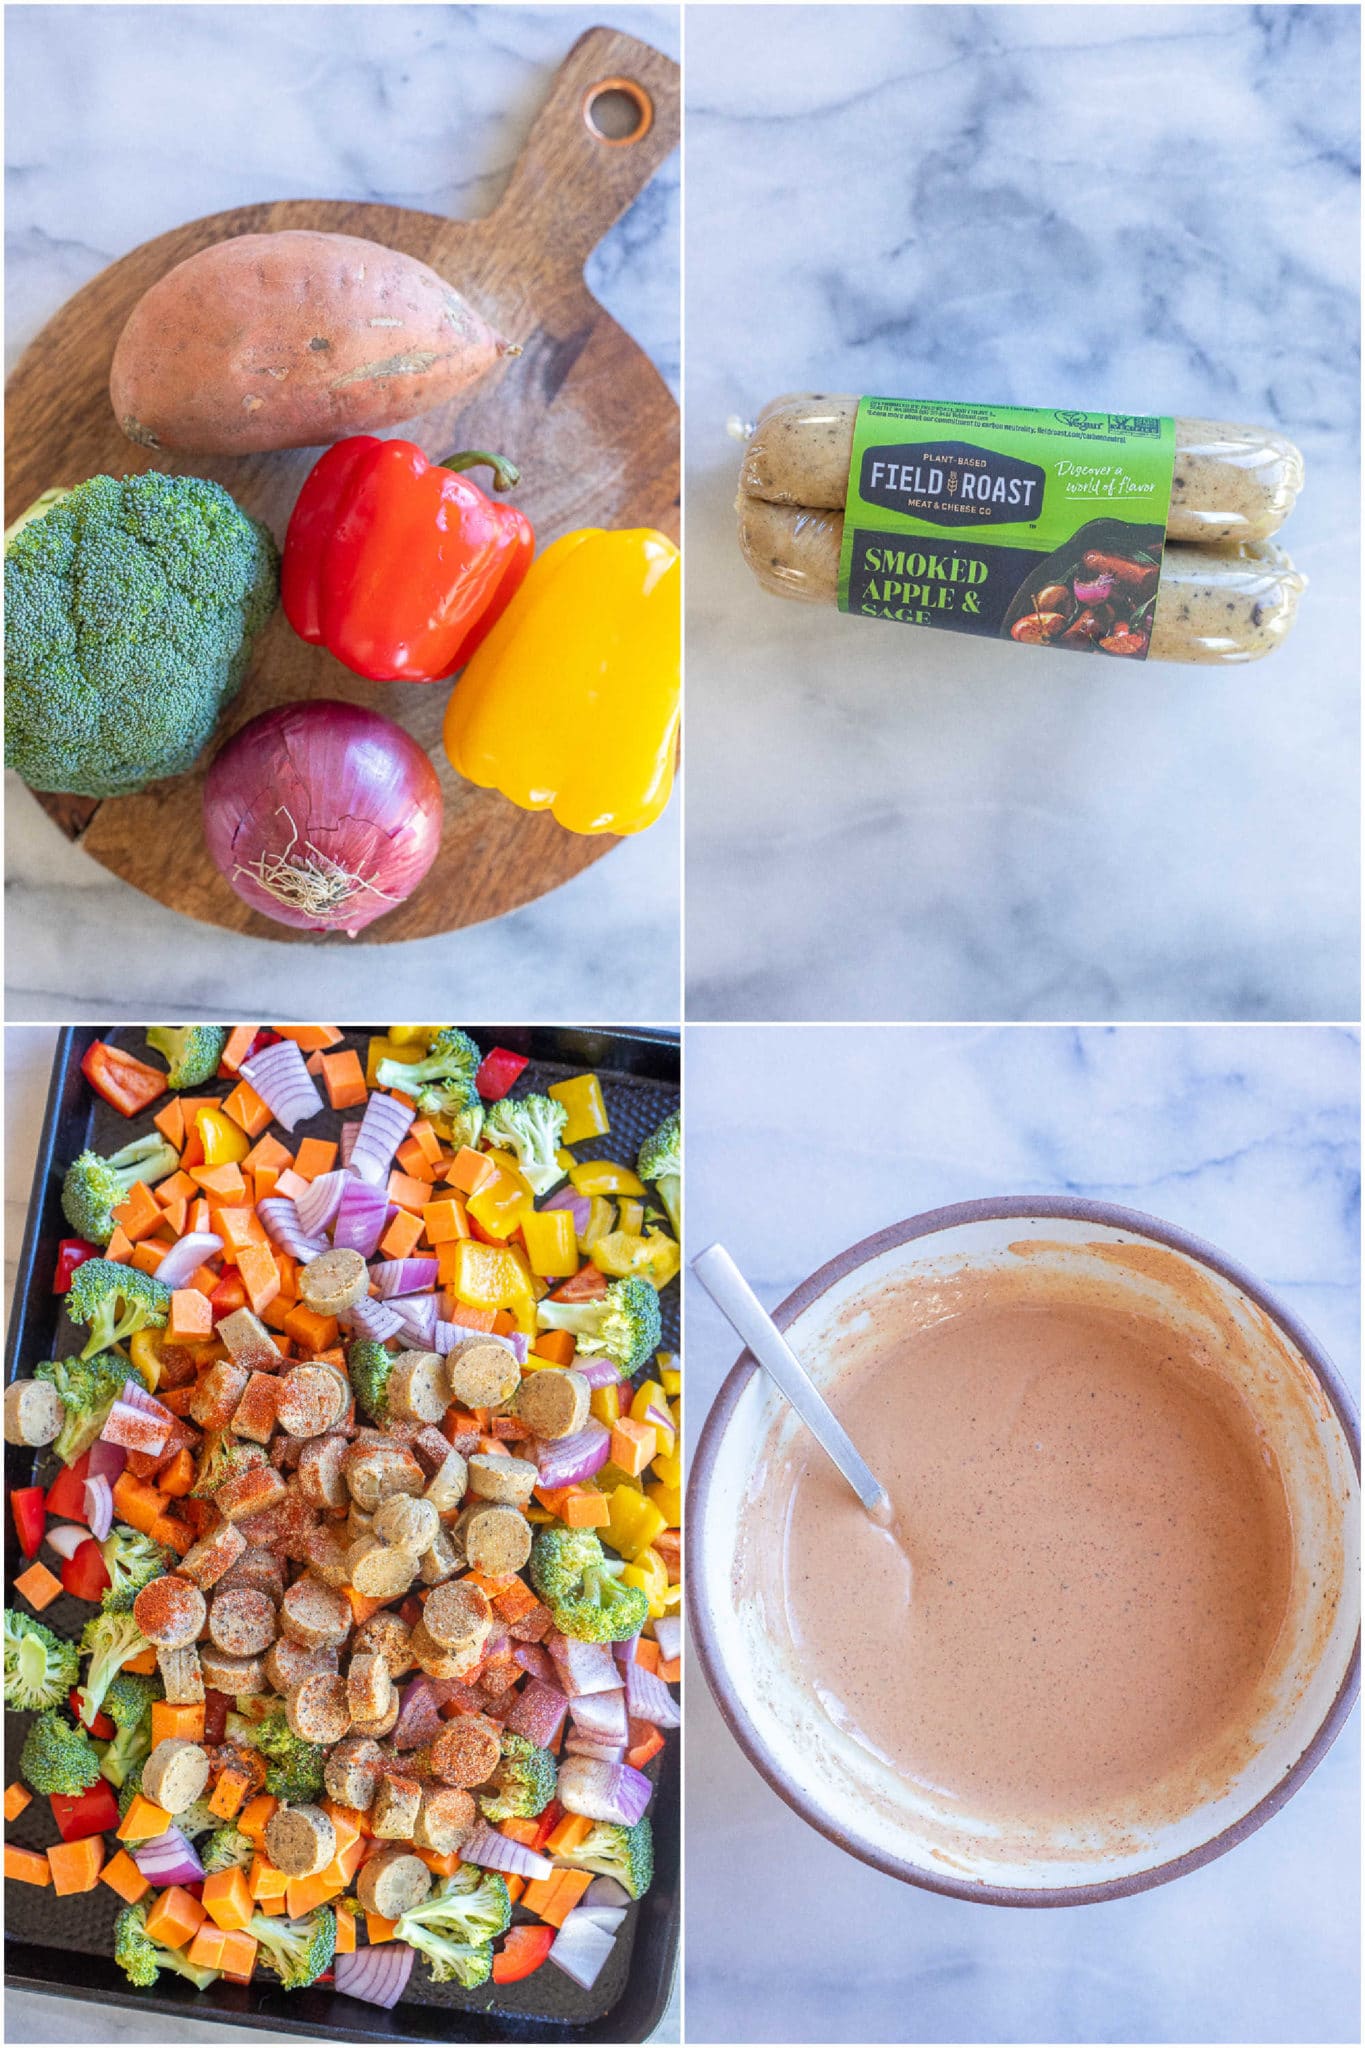 showing the ingredients used to make this roasted vegetable and sausage bake with a creamy bbq tahini sauce